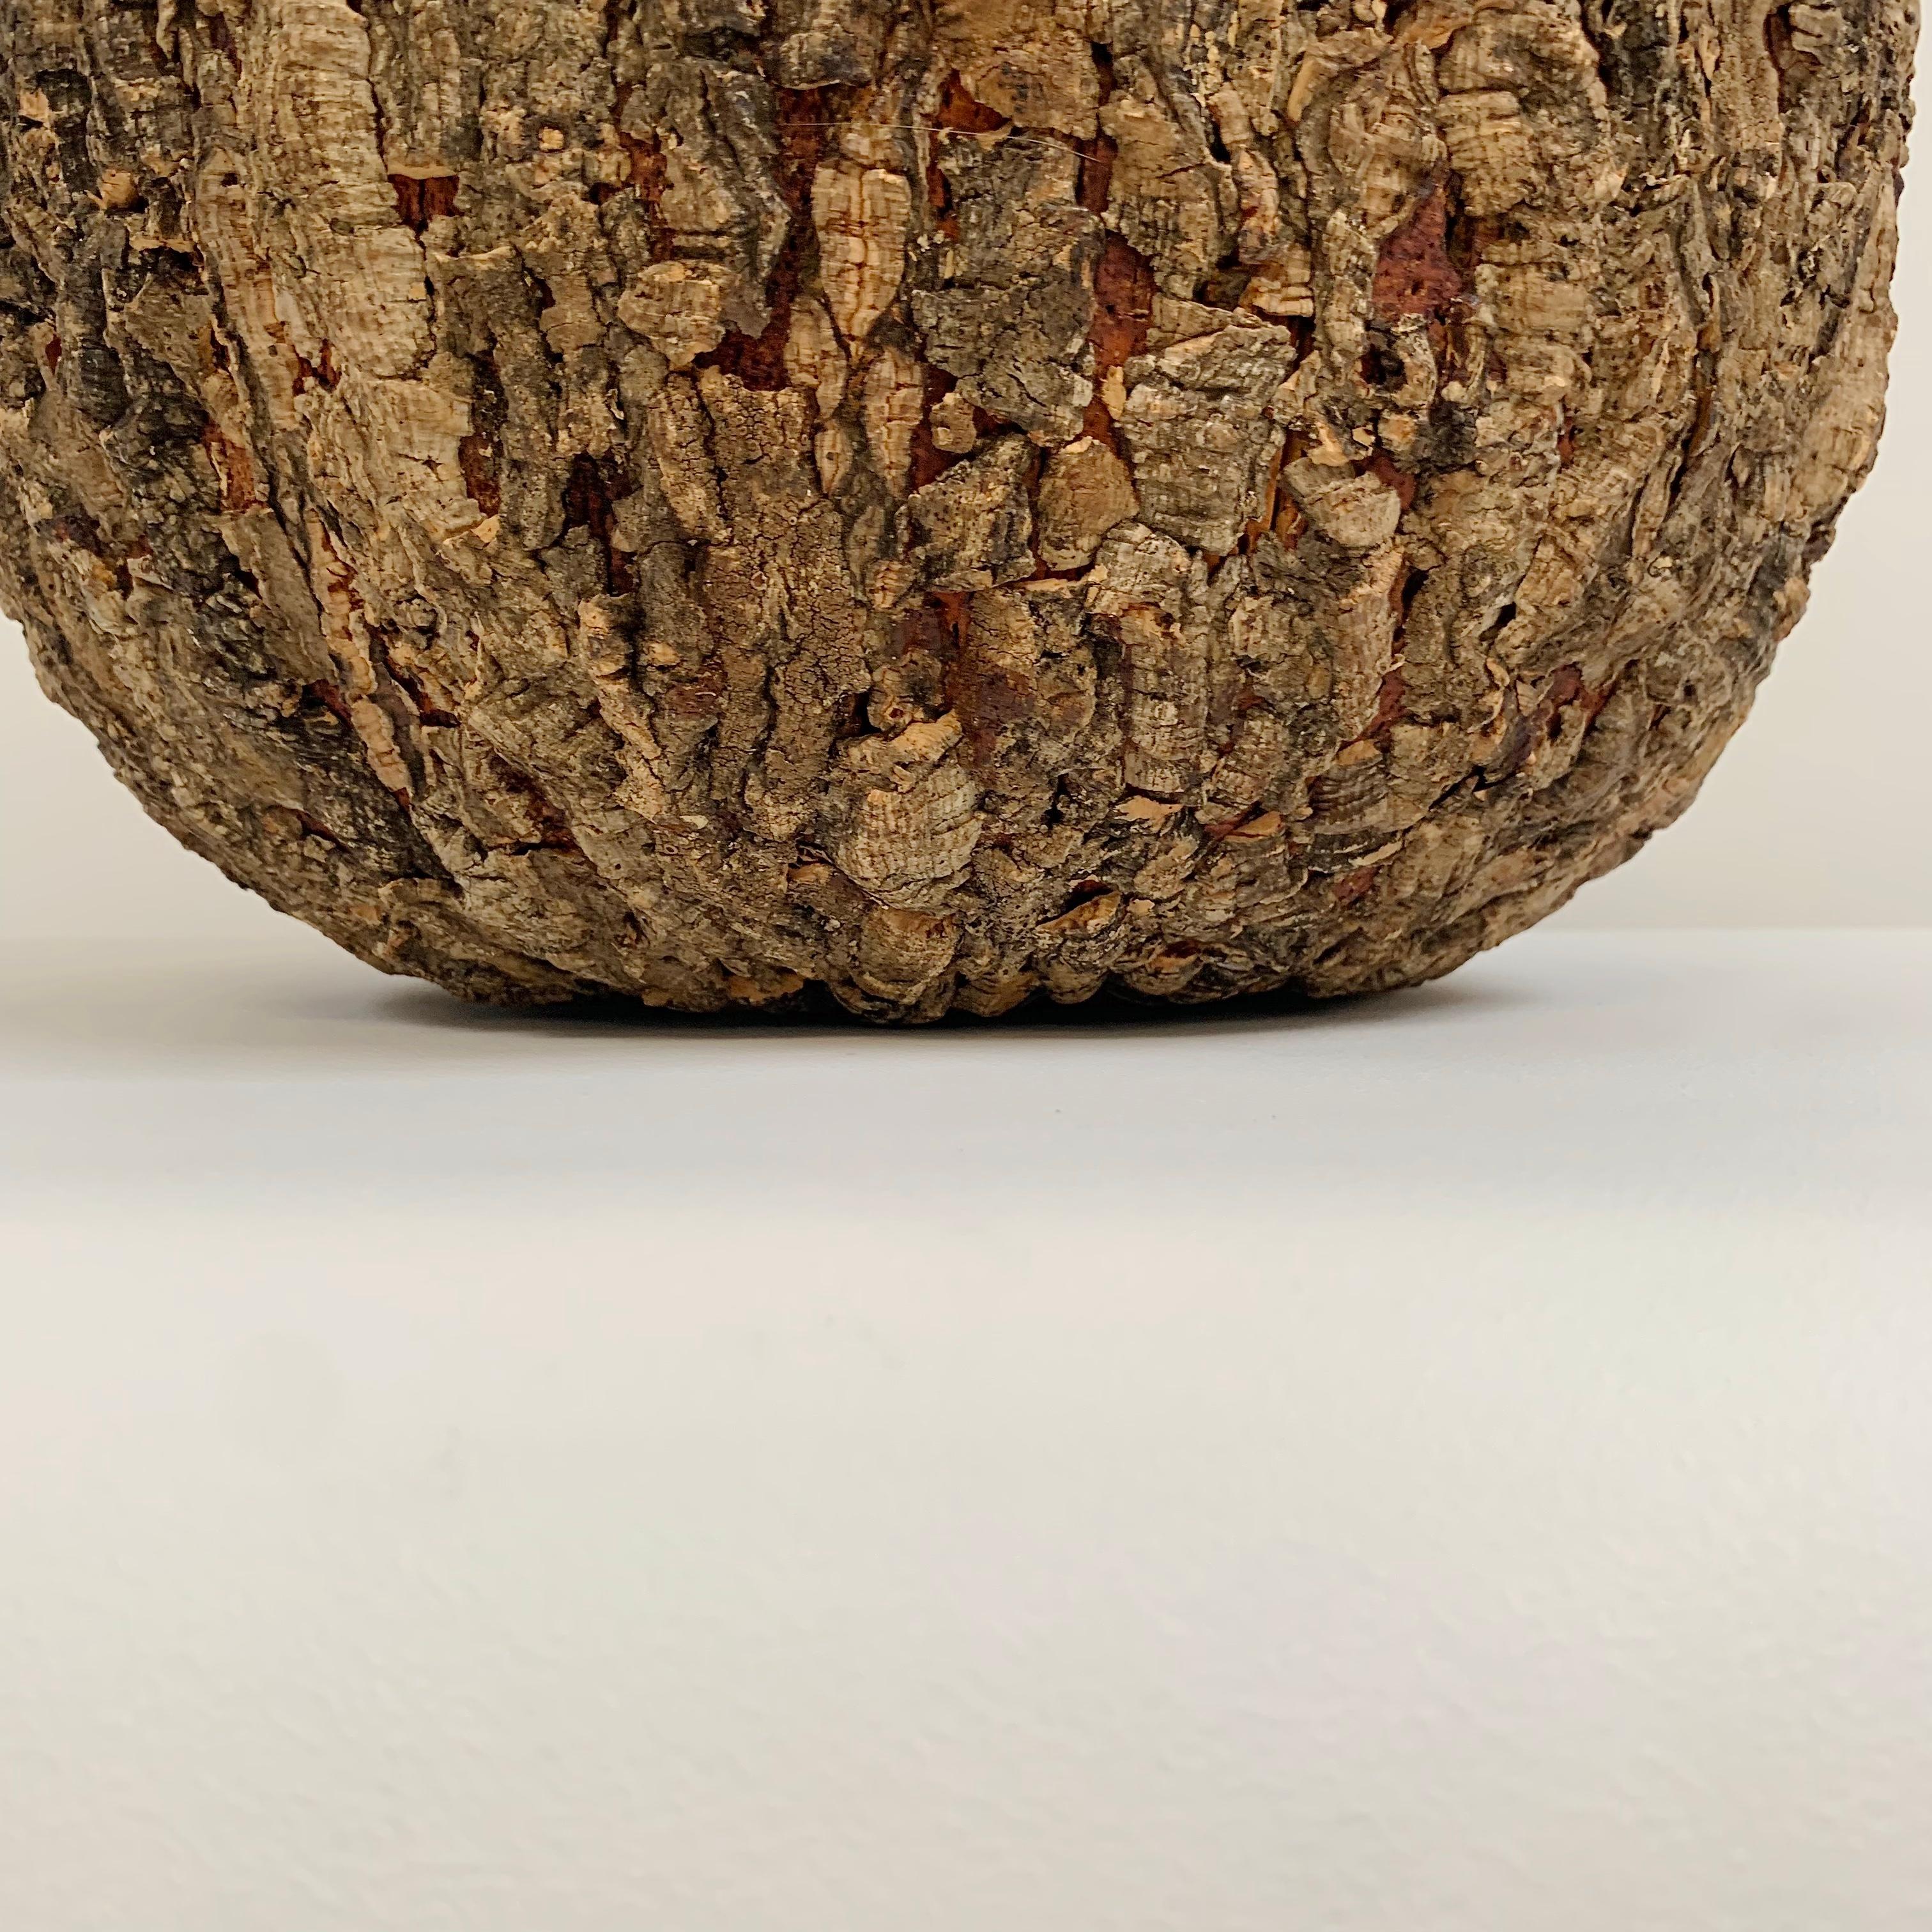 Gabrielle Crespi Signed Large Cork Bowl, circa 1974, Italy. For Sale 5